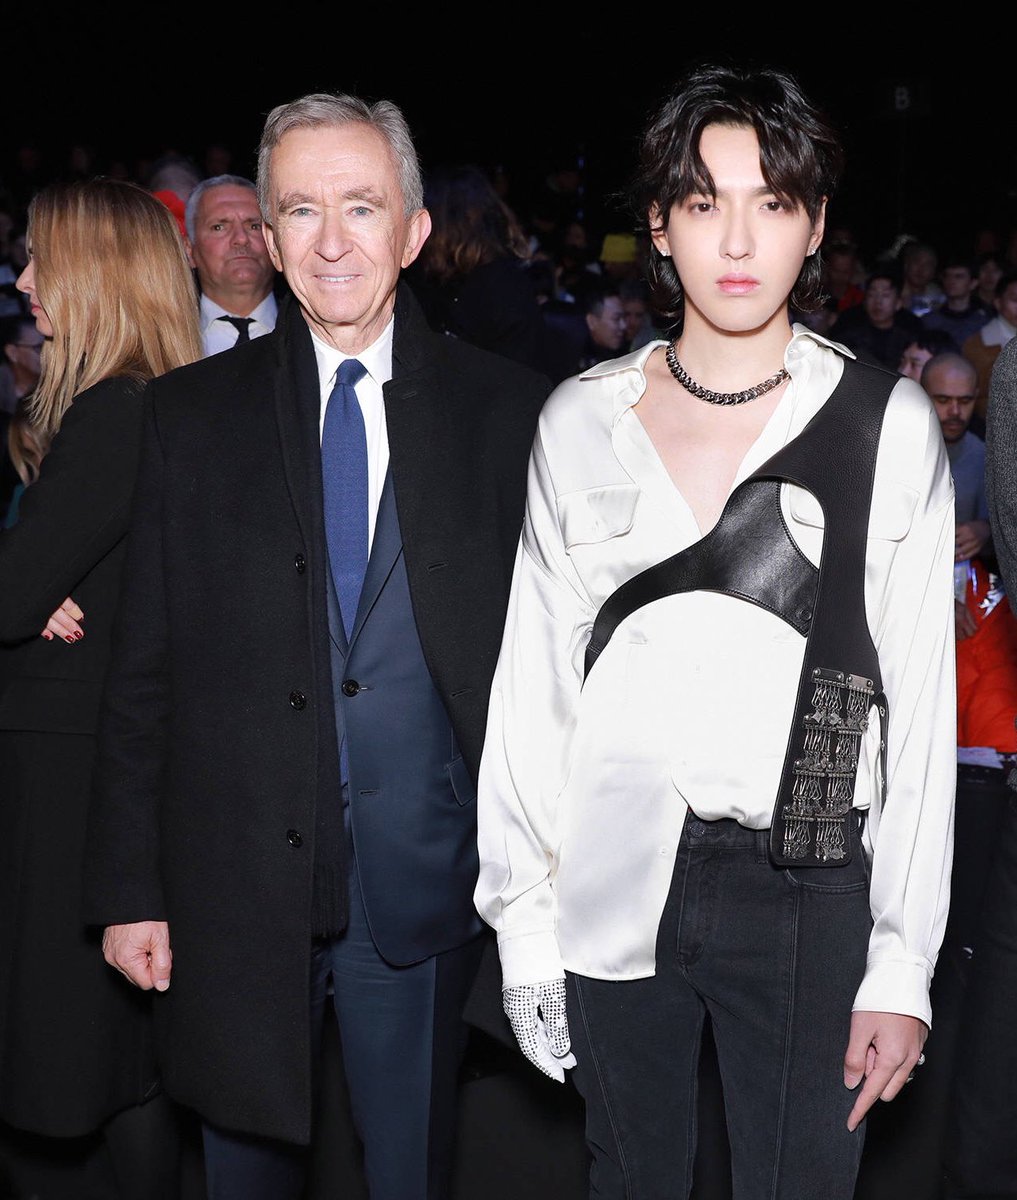 The CEO of LVMH group, Bernard Arnault (left) also take photo with the LV’s global ambassador Kris Wu.Have no idea what is LVMH group?It’s the parent company of Louis Vuitton, Bvlgari, Fendi, Christian Dior, Givenchy, Loewe, Marc Jacobs, Kenzo, Sephora, etc etc